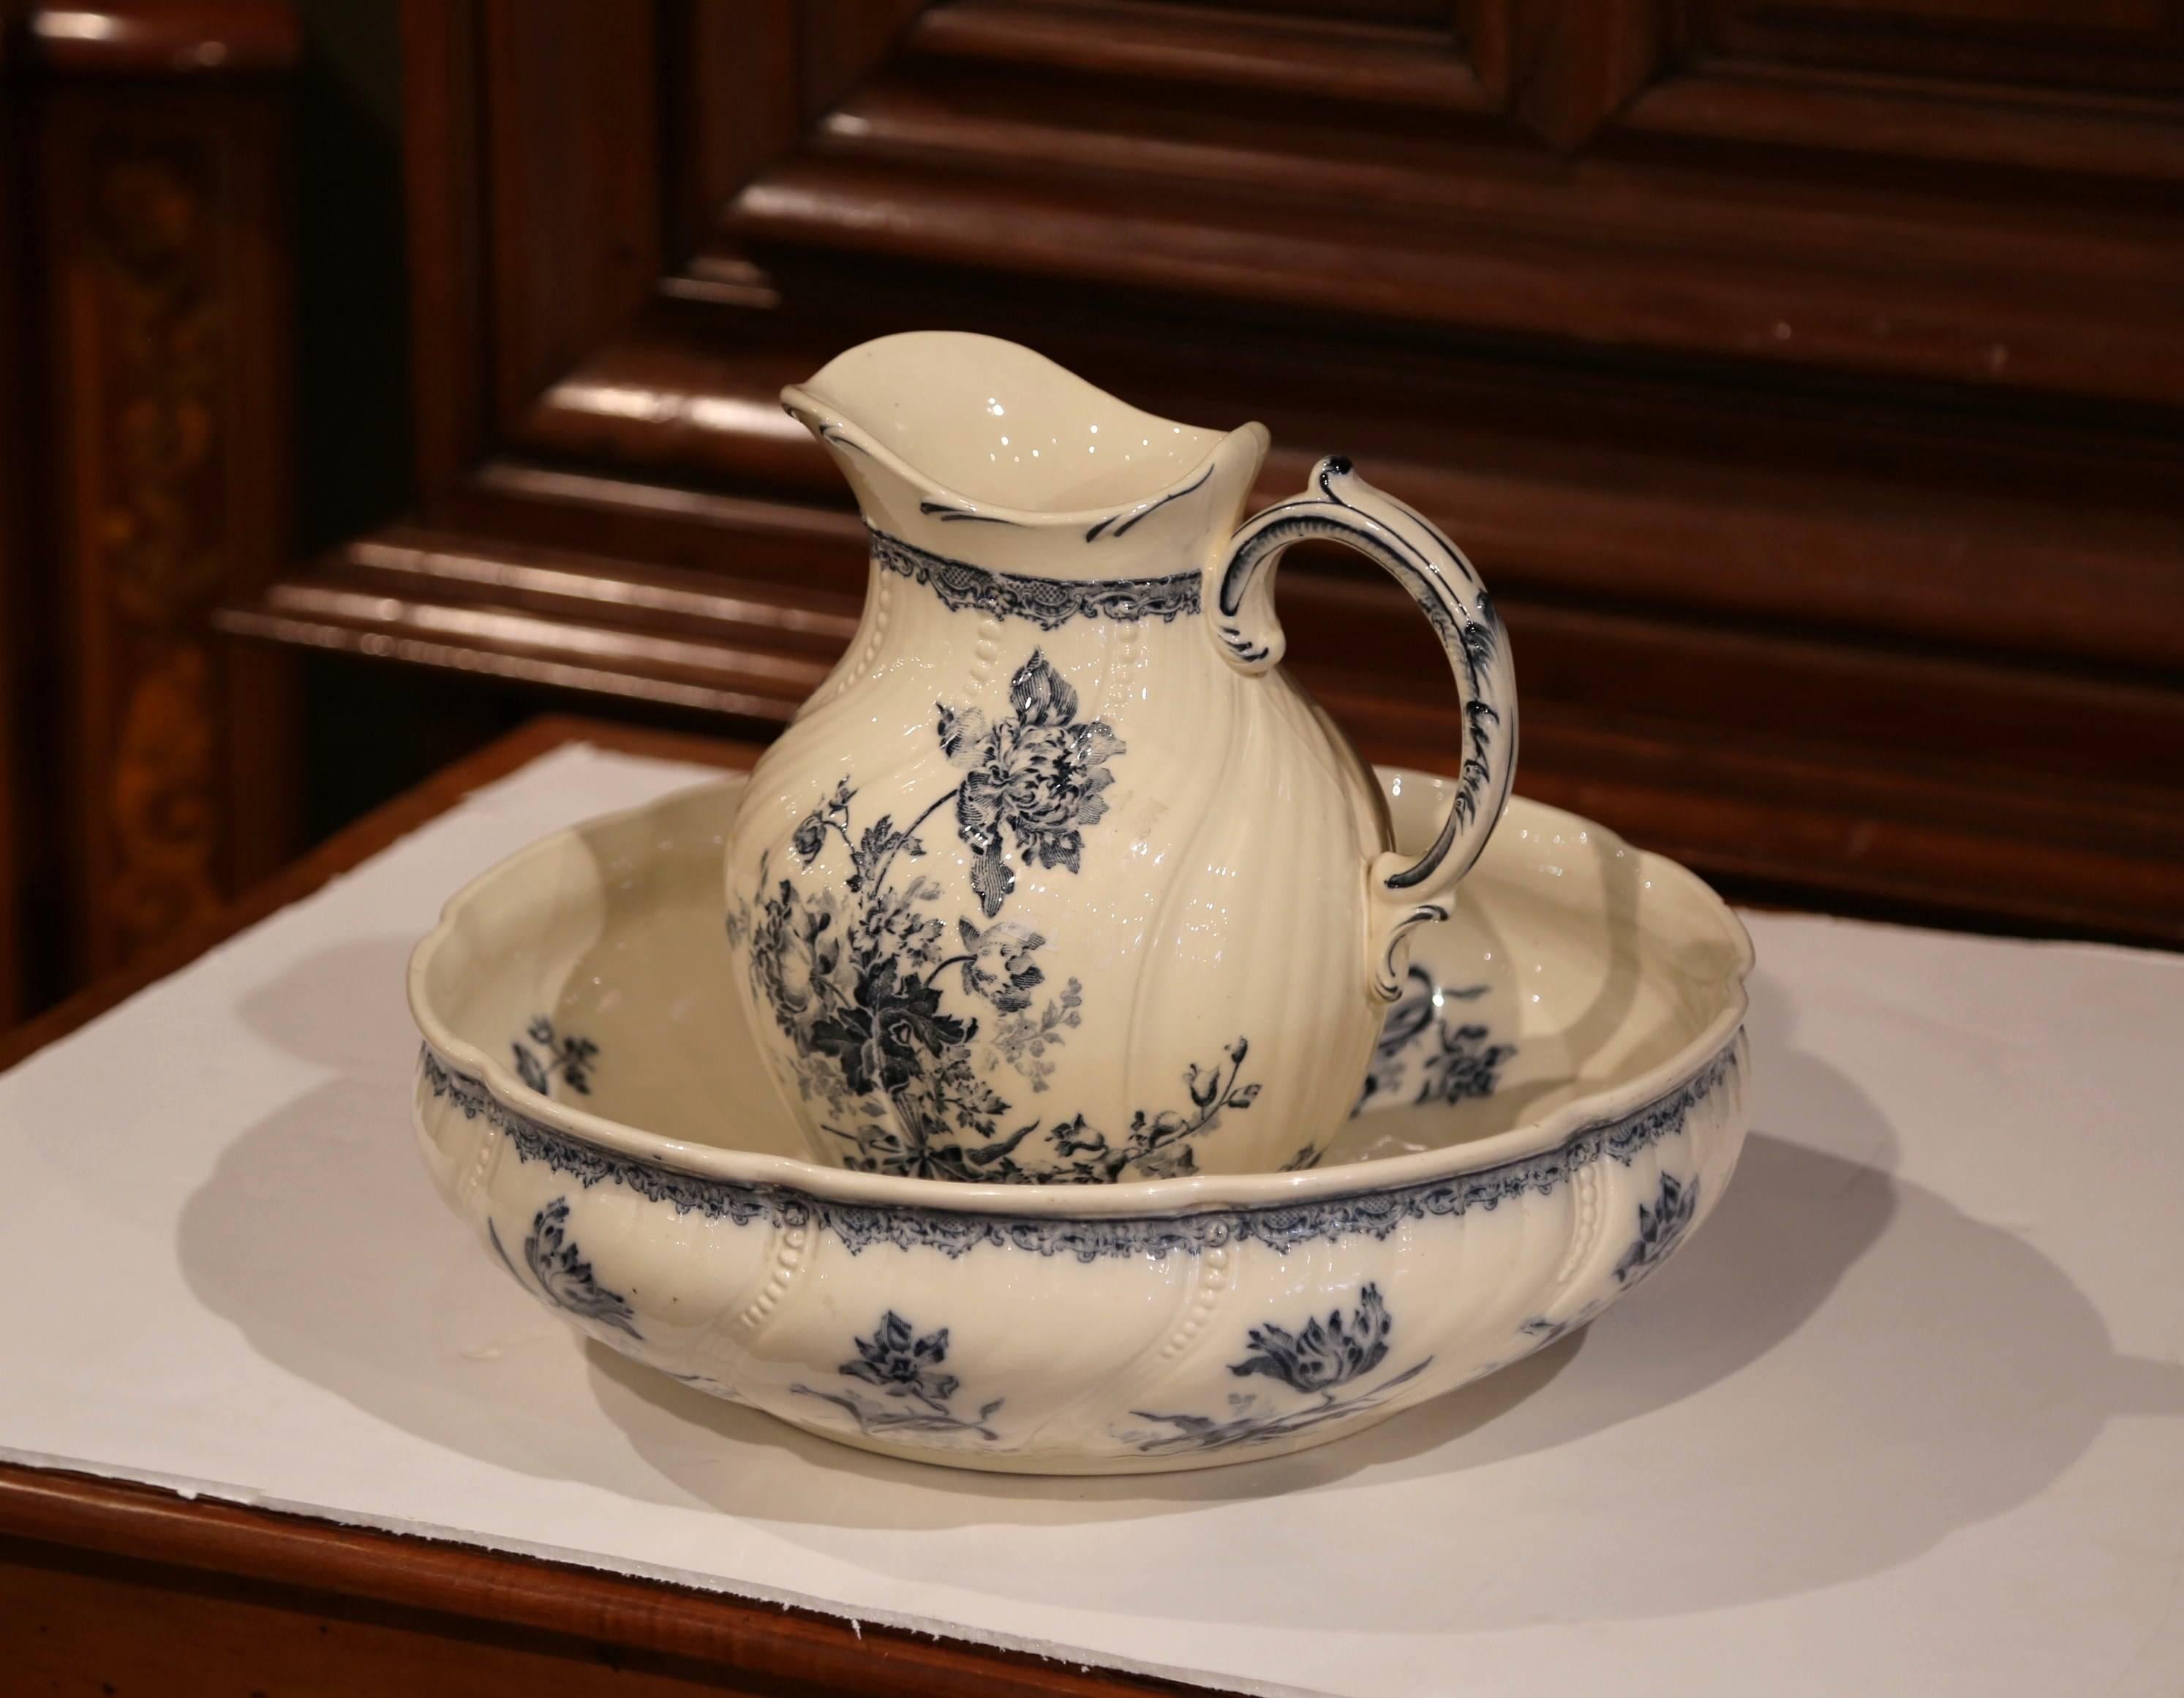 This elegant antique water pitcher with matching bowl was crafted in Sarreguemines (Lorraine), France, circa 1860, the hand painted ceramic set with blue and white flowers was typically used to freshen up in the morning. Good condition overall with